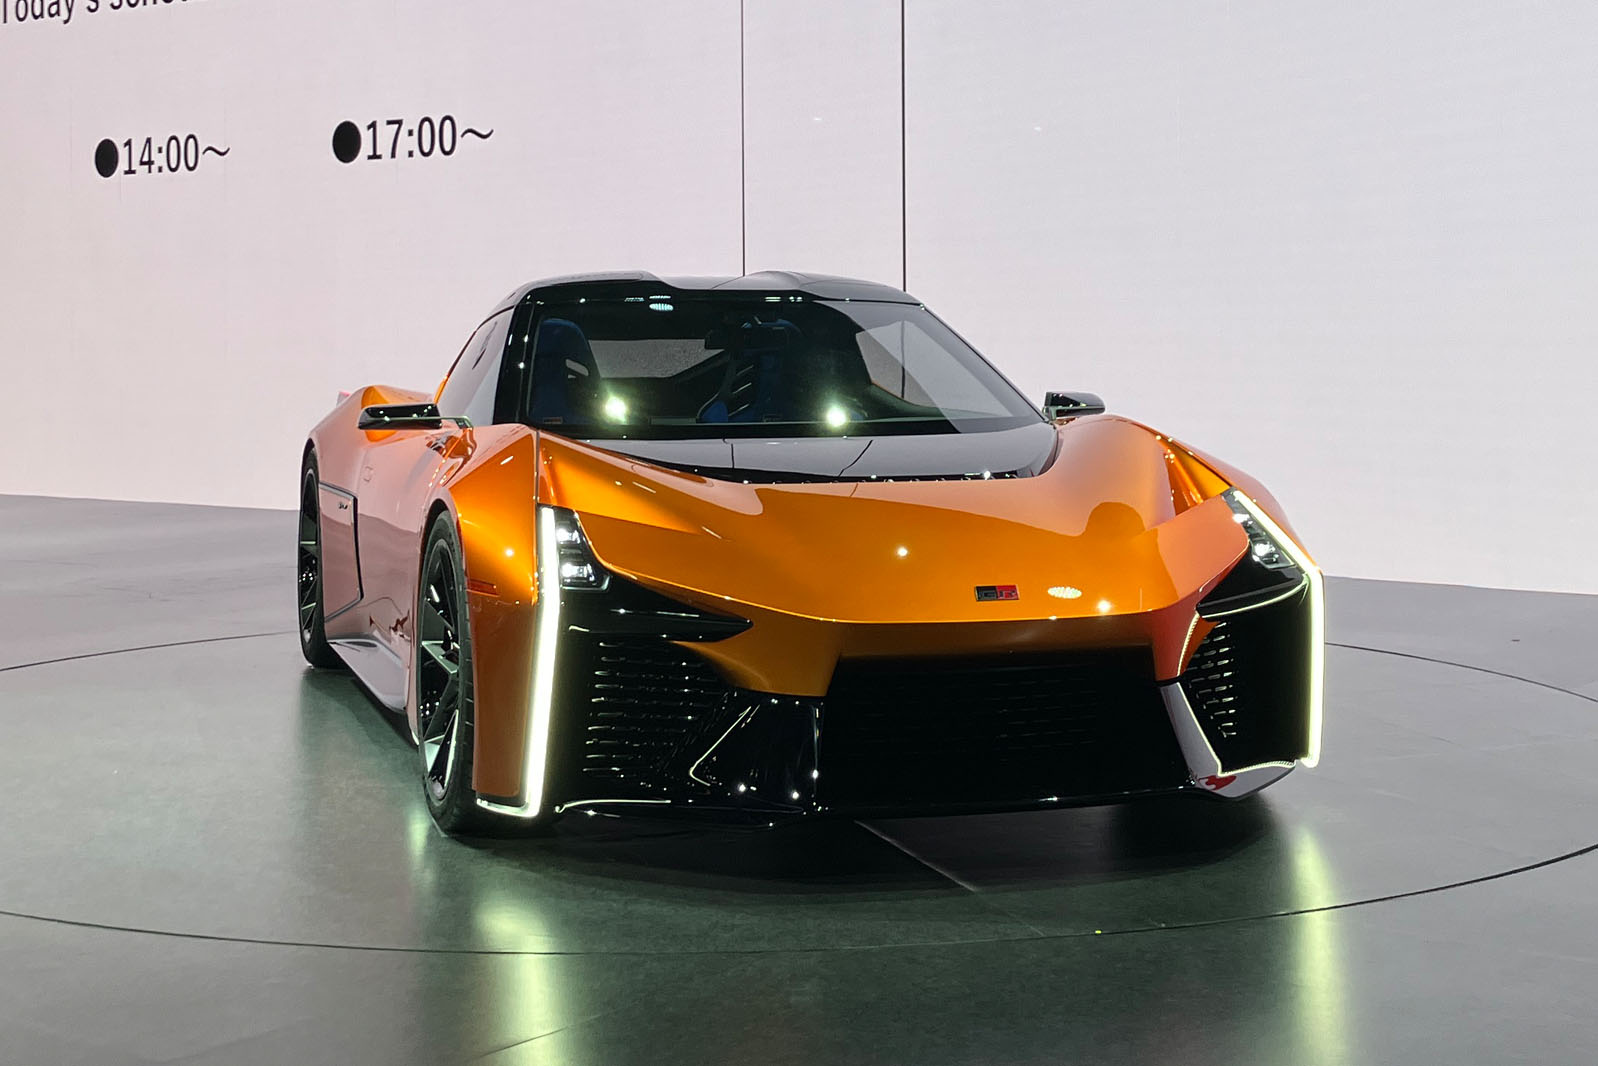 Toyota's Prototype EV Sports Car Simulates a Manual with a Clutch